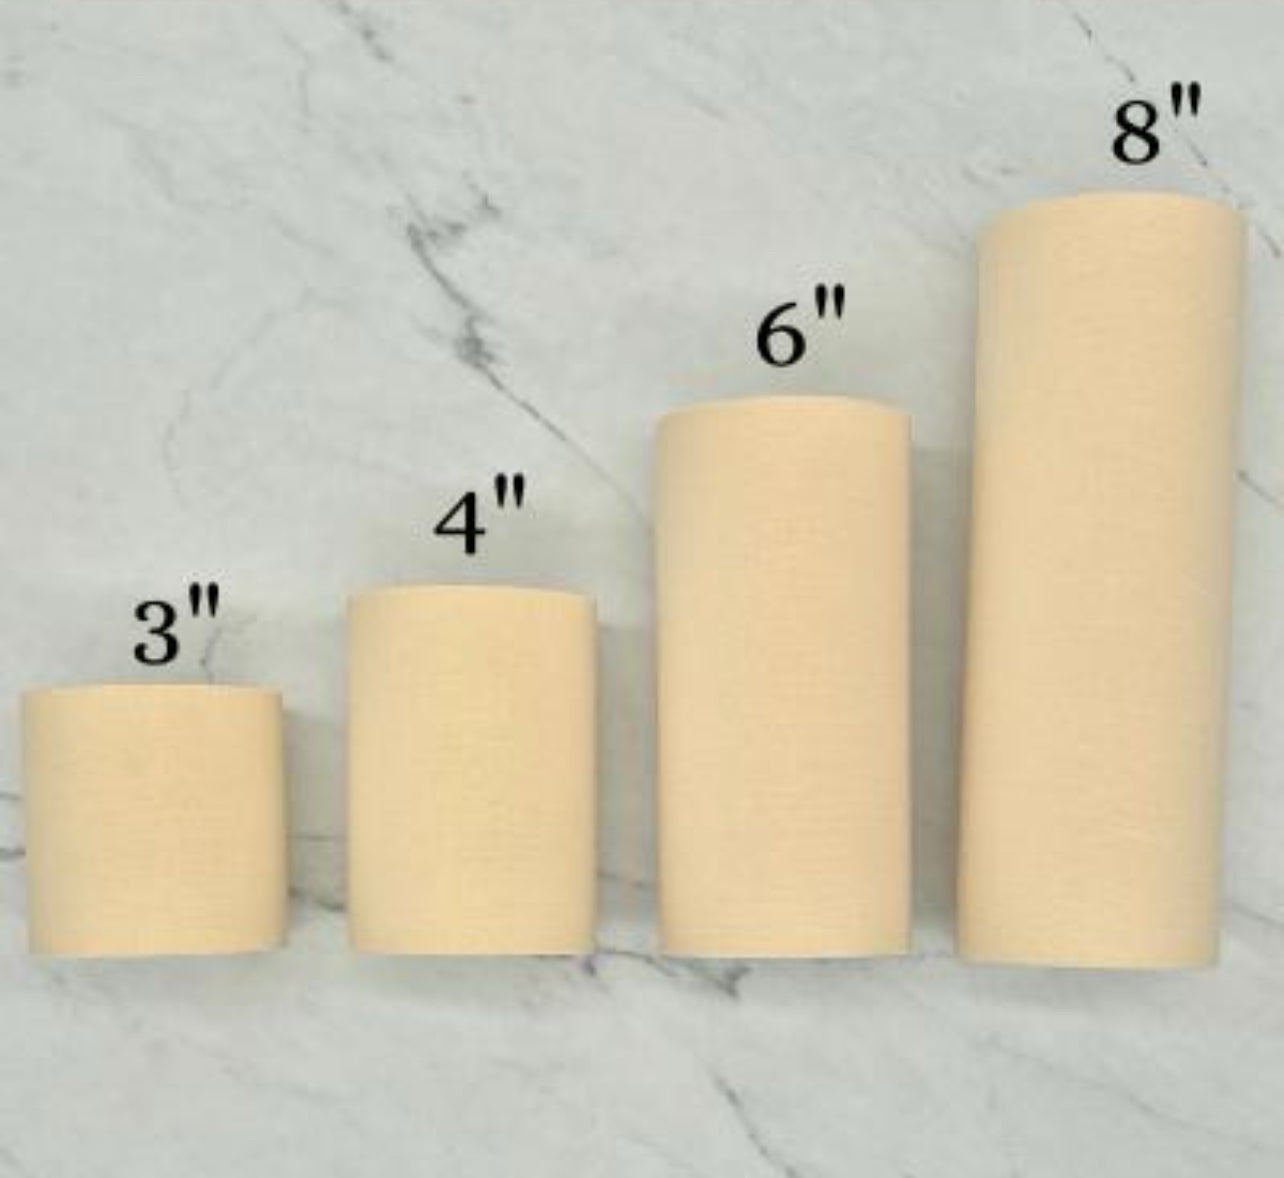 IMPREZA Breast & Body Tape - Sizes - 3 inches, 4 inches, 6 inches, 8 inches